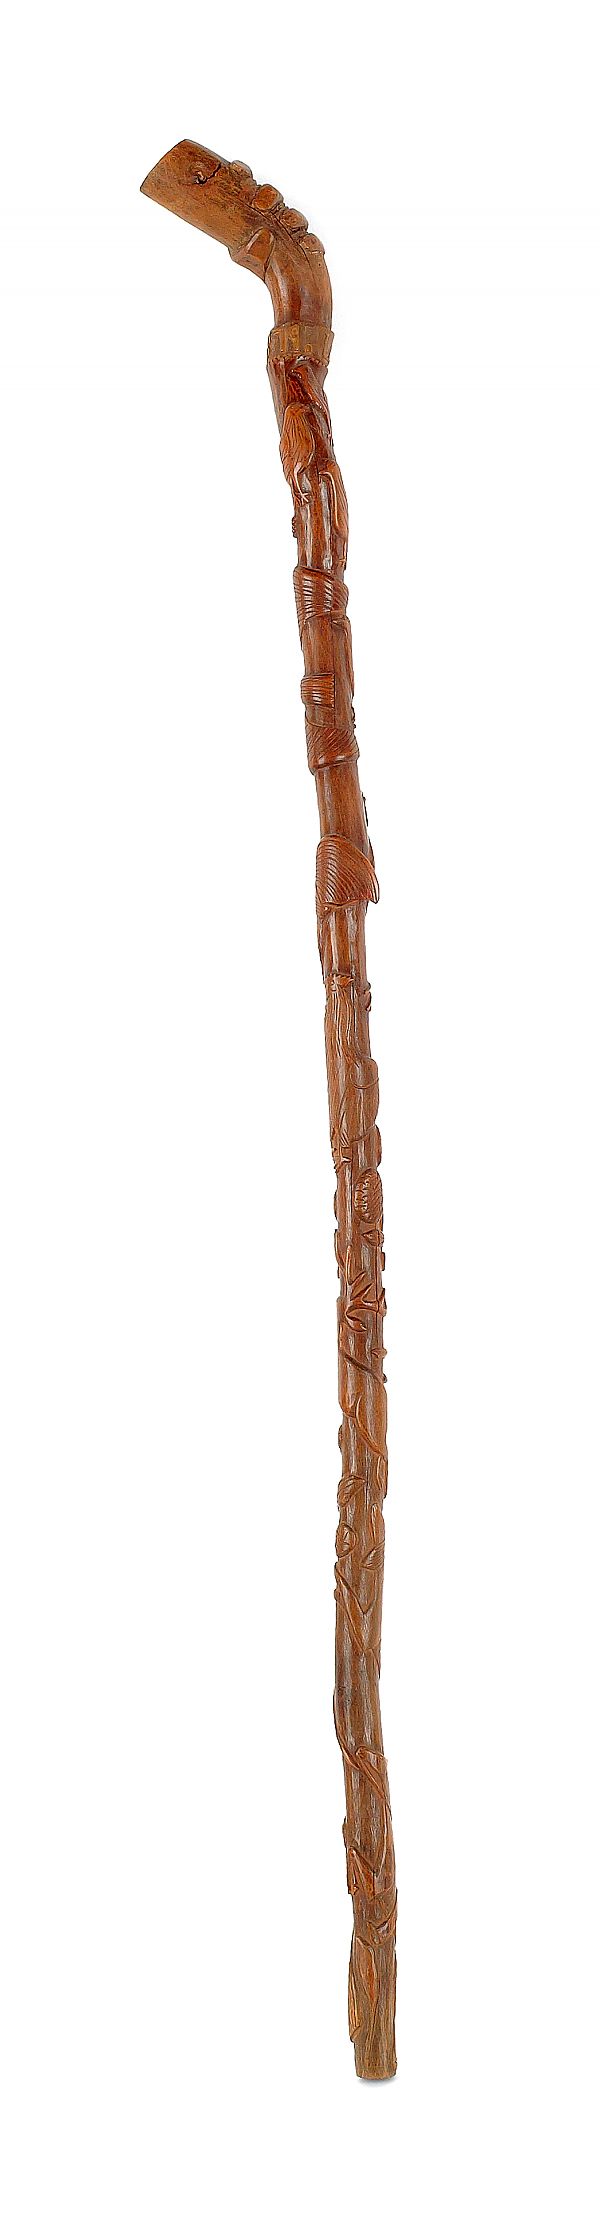 Pennsylvania carved cane dated